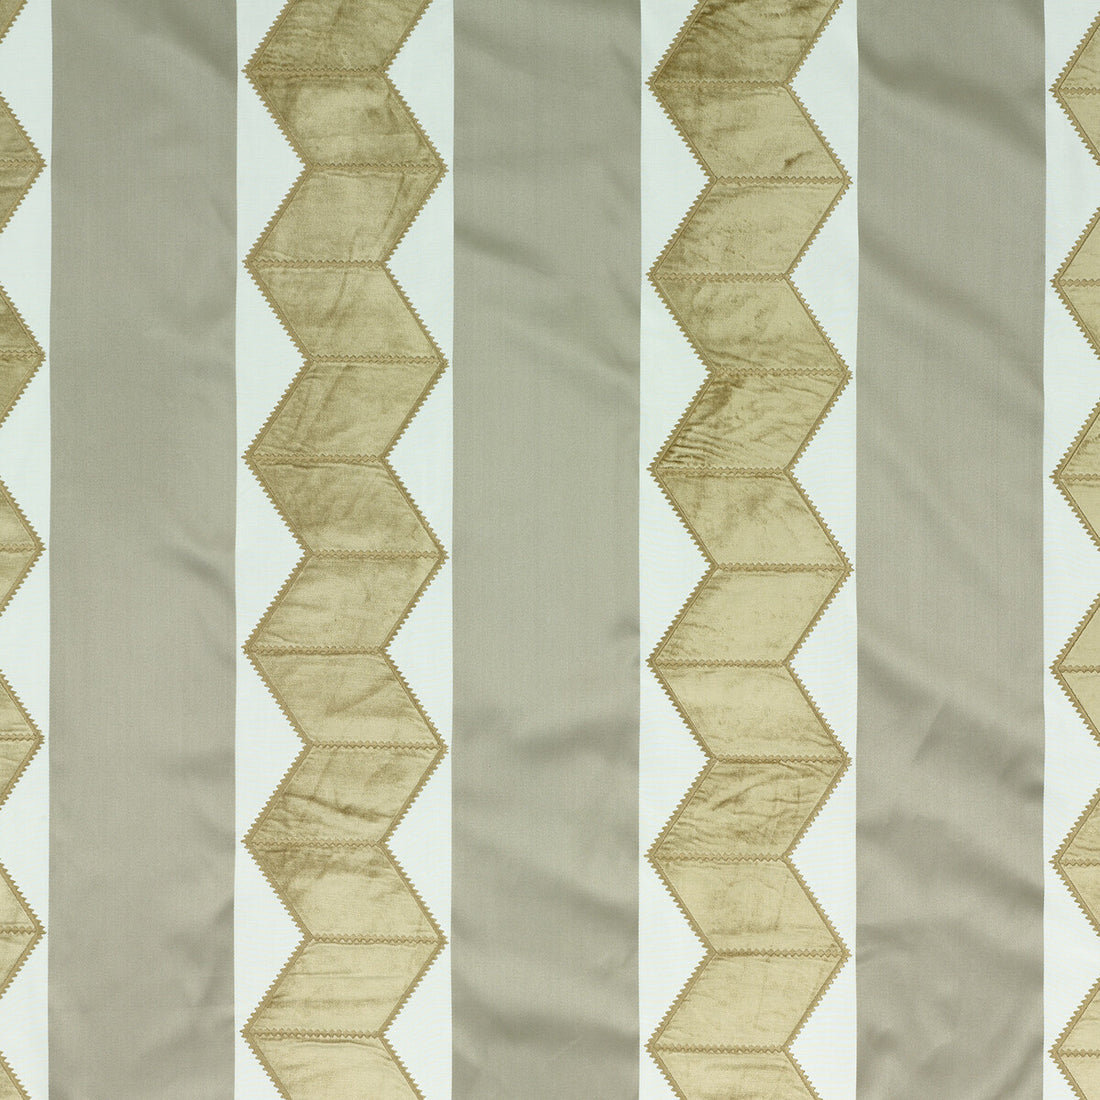 Cascade Velvet fabric in bronze/pewter color - pattern ED85208.2.0 - by Threads in the Variation collection